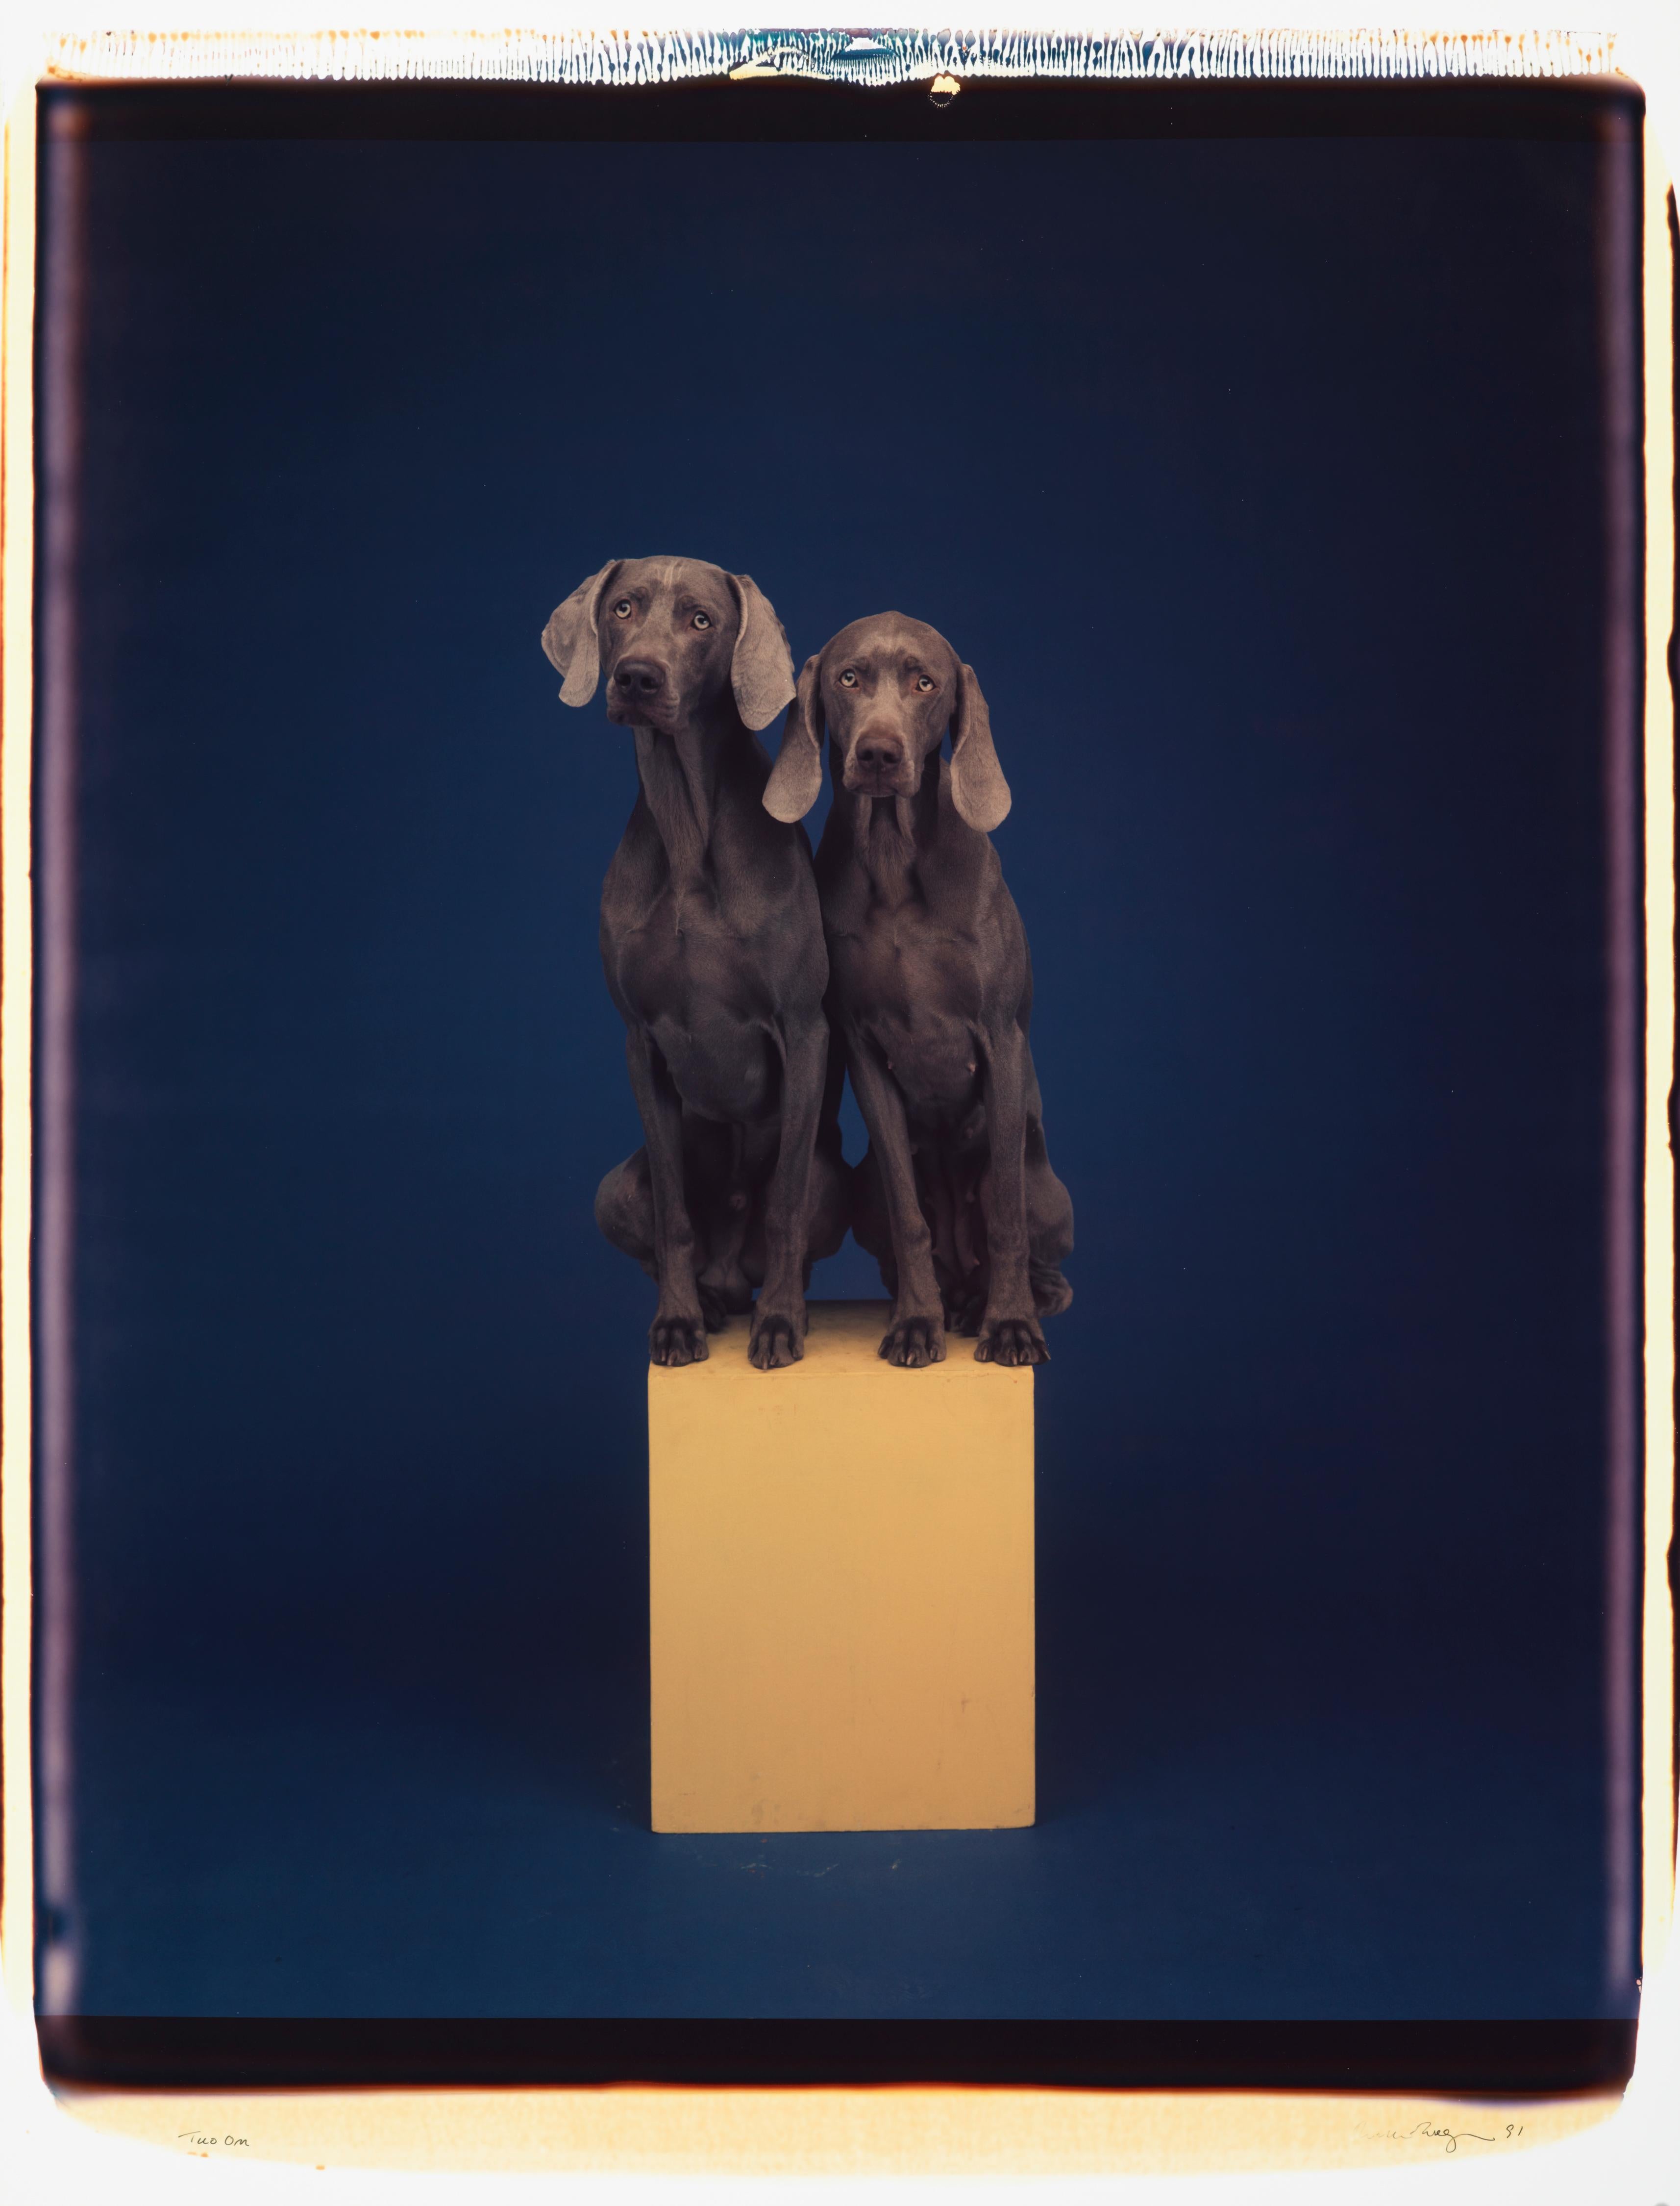 Two On - William Wegman (Colour Photography)
Signed and inscribed with title
Unique colour Polaroid print, printed 1991
24 x 20 inches

The dogs, bewigged and bedecked with outfits and props, demonstrate a wide range of human personas. These works